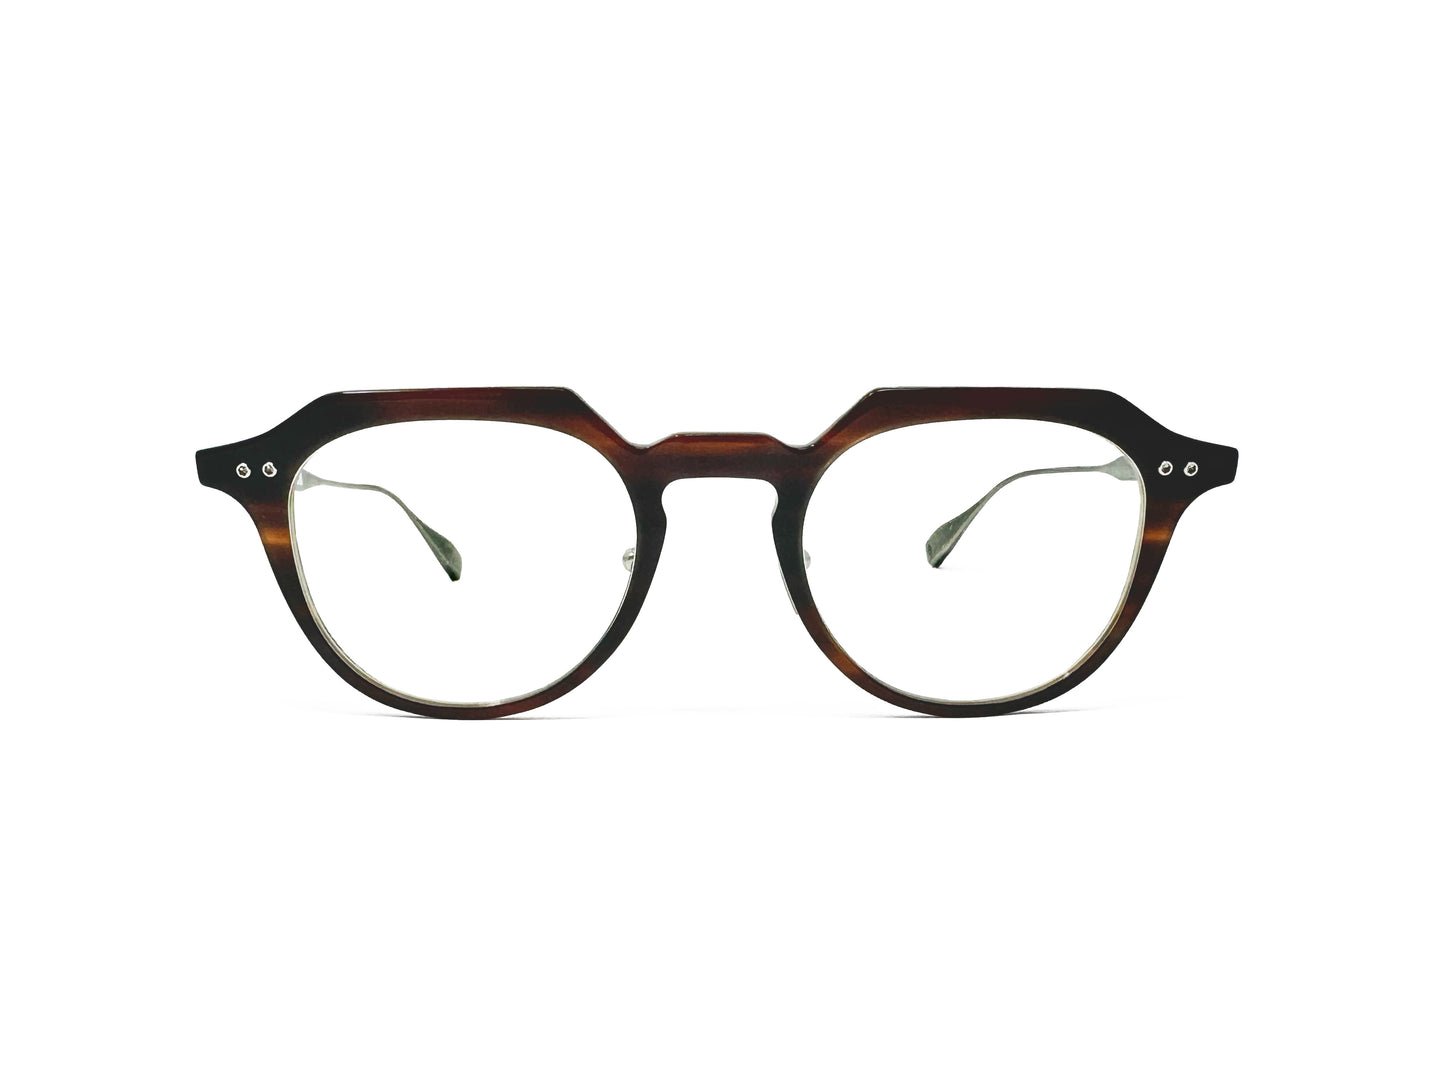 Dita Eyewear rounded optical frame with flat-top and keyhole bridge, acetate front with metal temples. Model: Oku. Color: 02 - Chestnut Swirl with antique silver temples. Front view. 